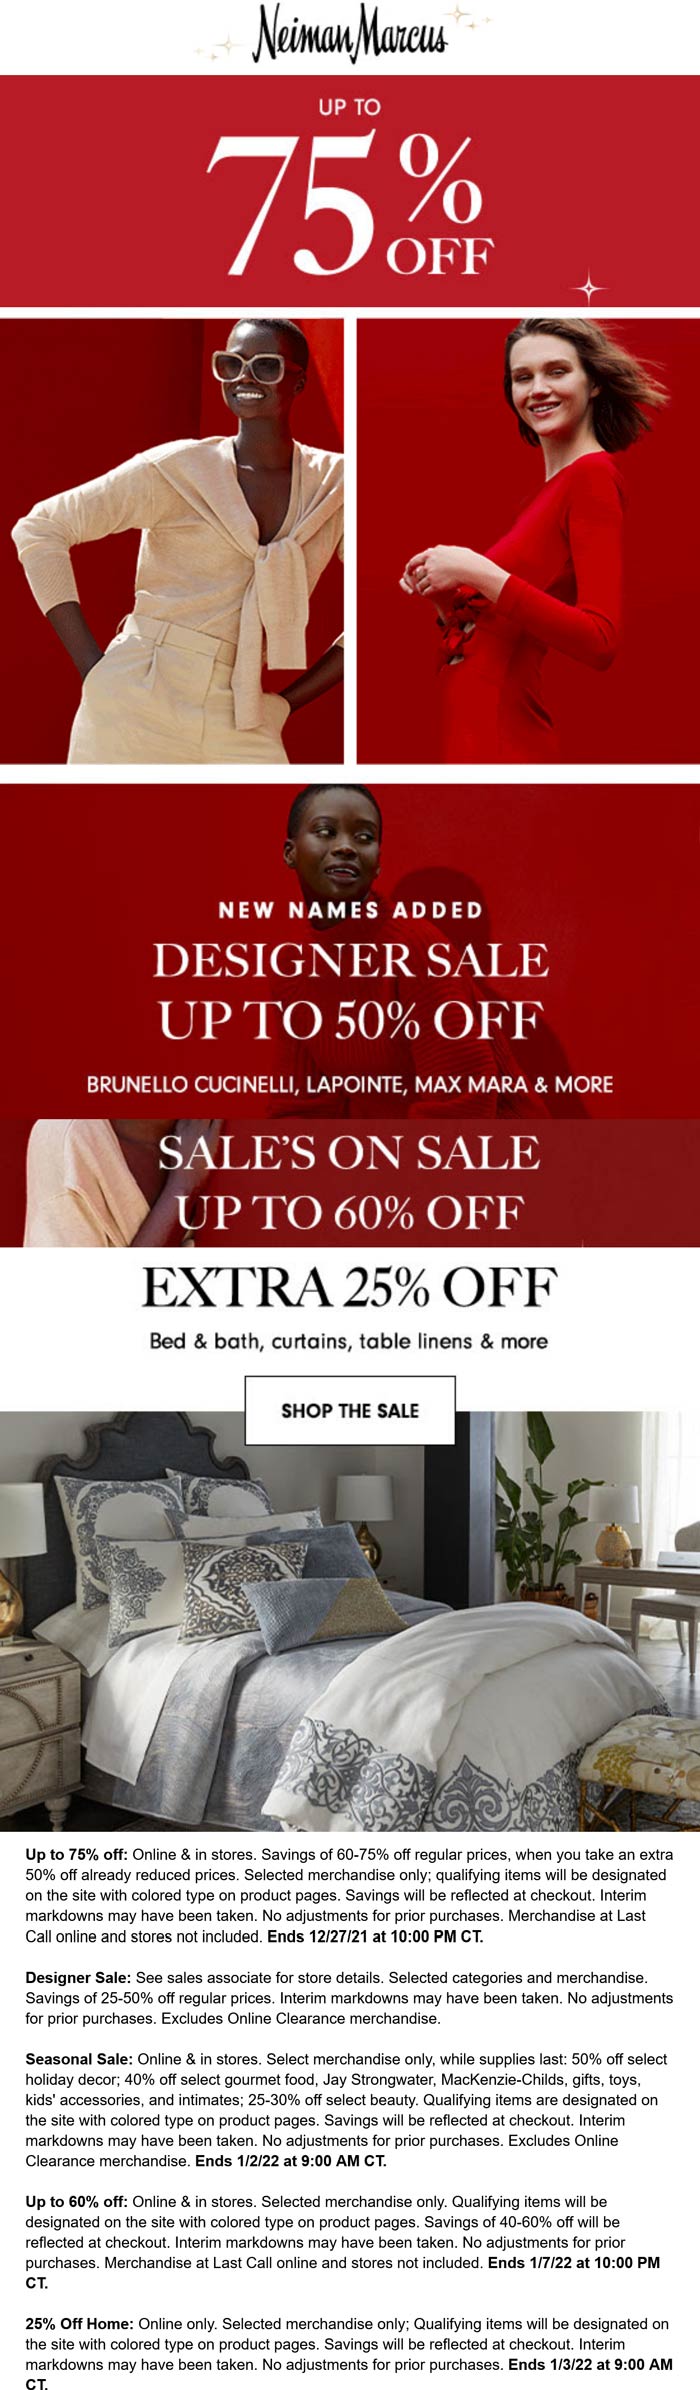 Neiman Marcus stores Coupon  Various 25-75% off categories at Neiman Marcus #neimanmarcus 